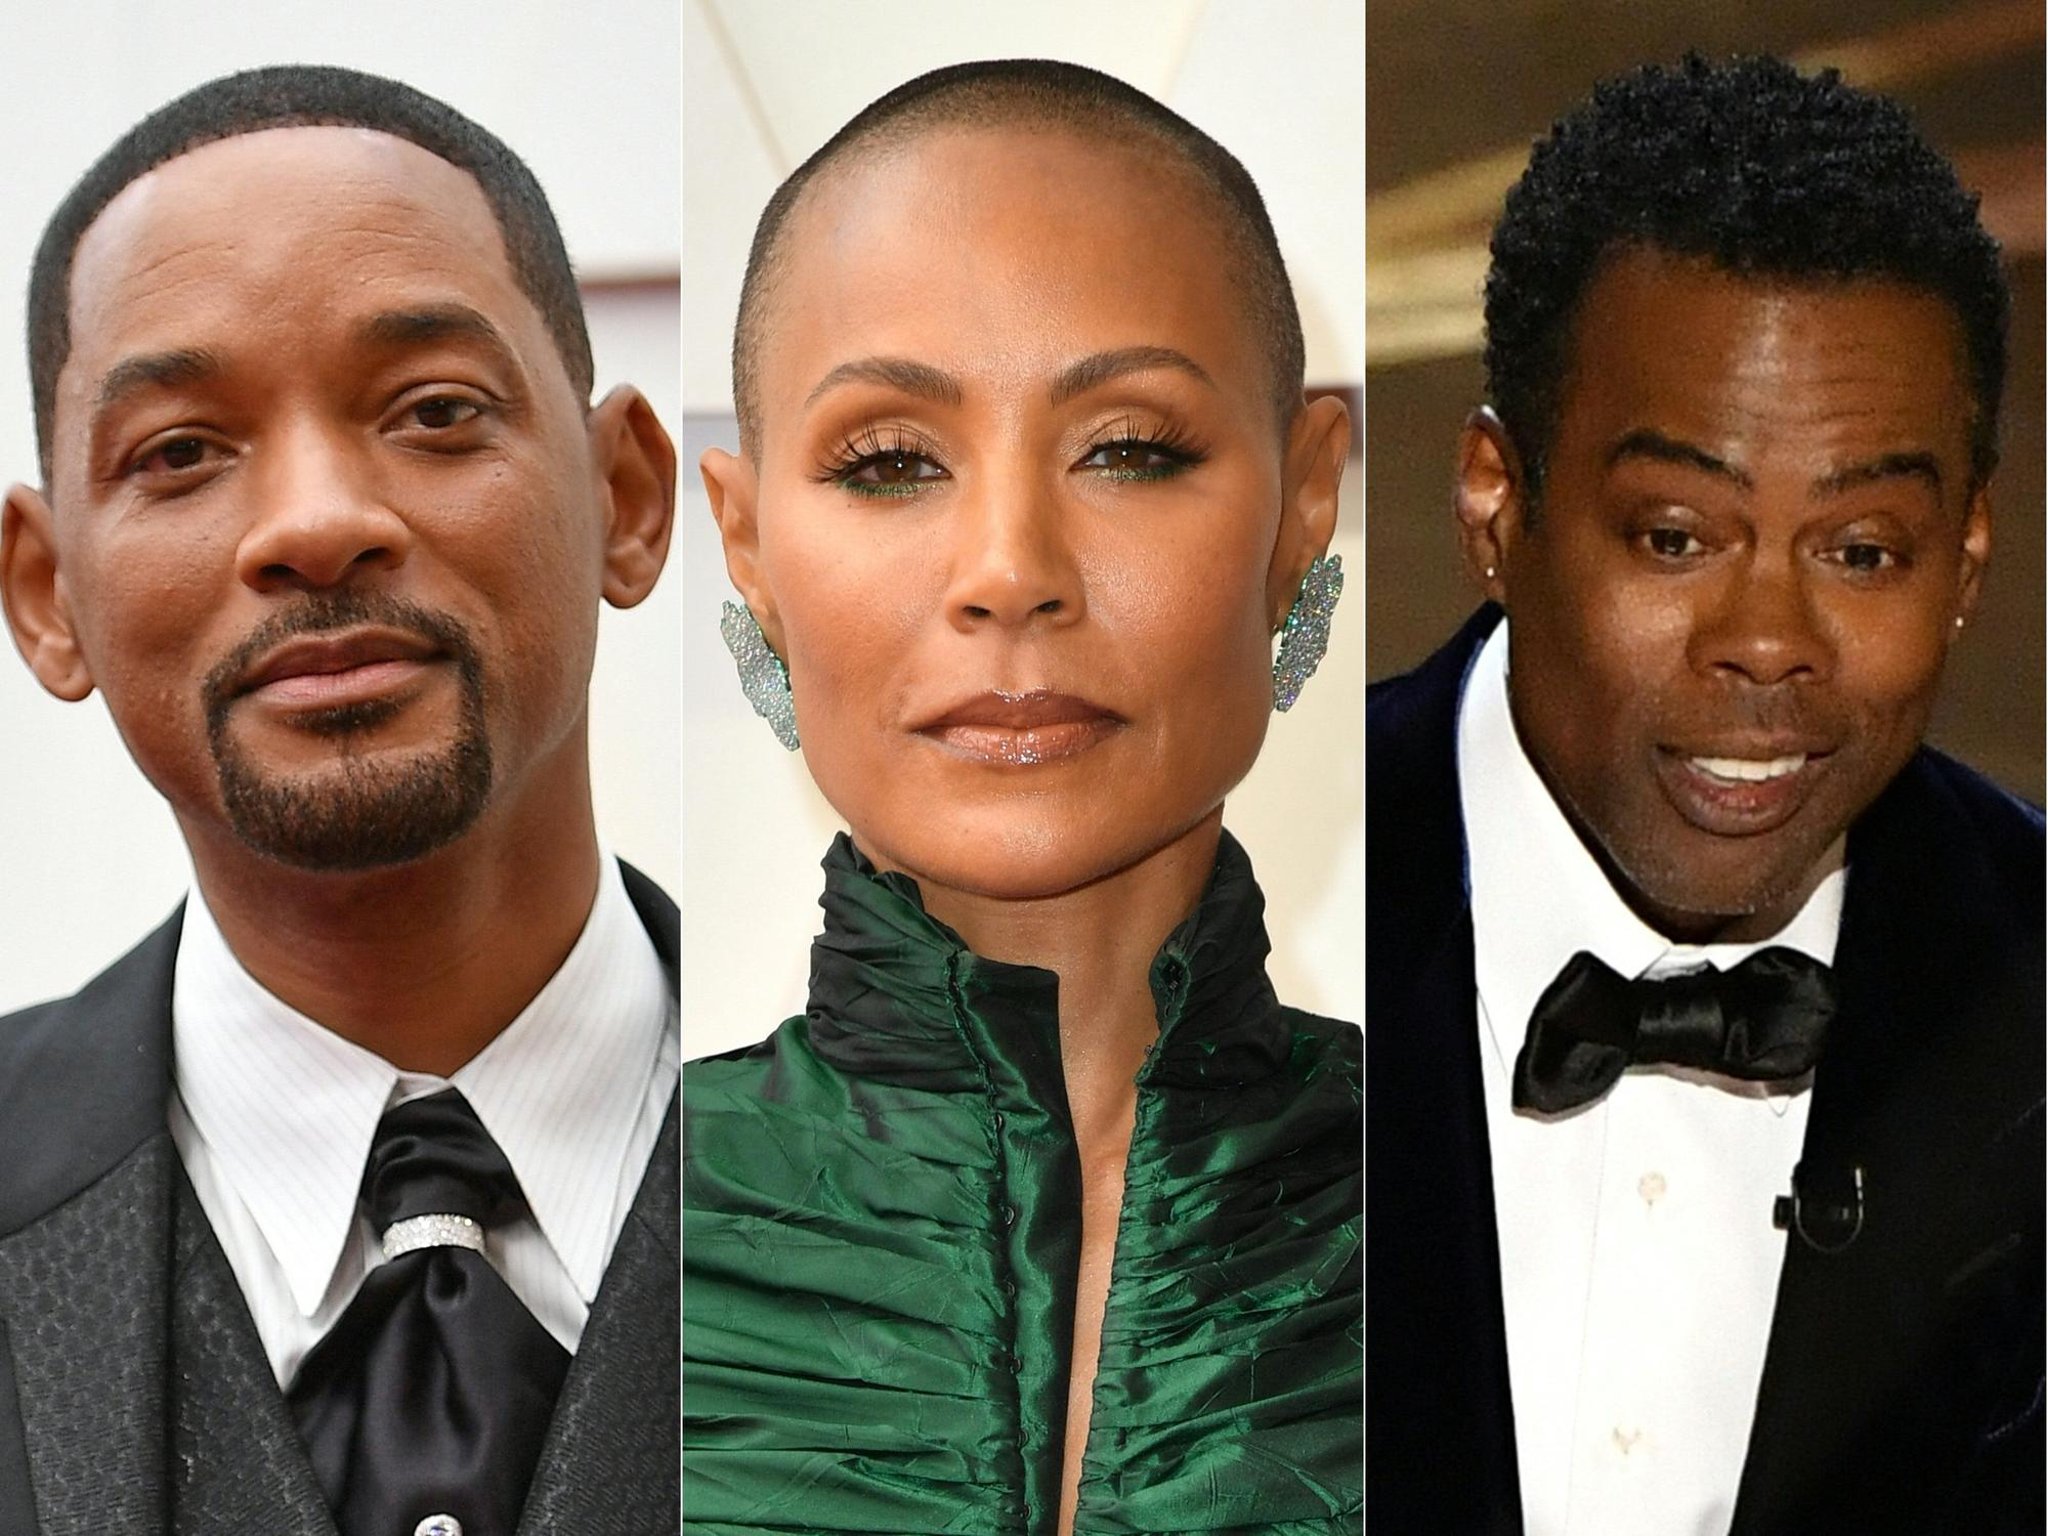 Oscars 2022: What did Chris Rock say to Will Smith? Why did Will Smith slap Chris Rock? GI Jane joke explained | The Scotsman